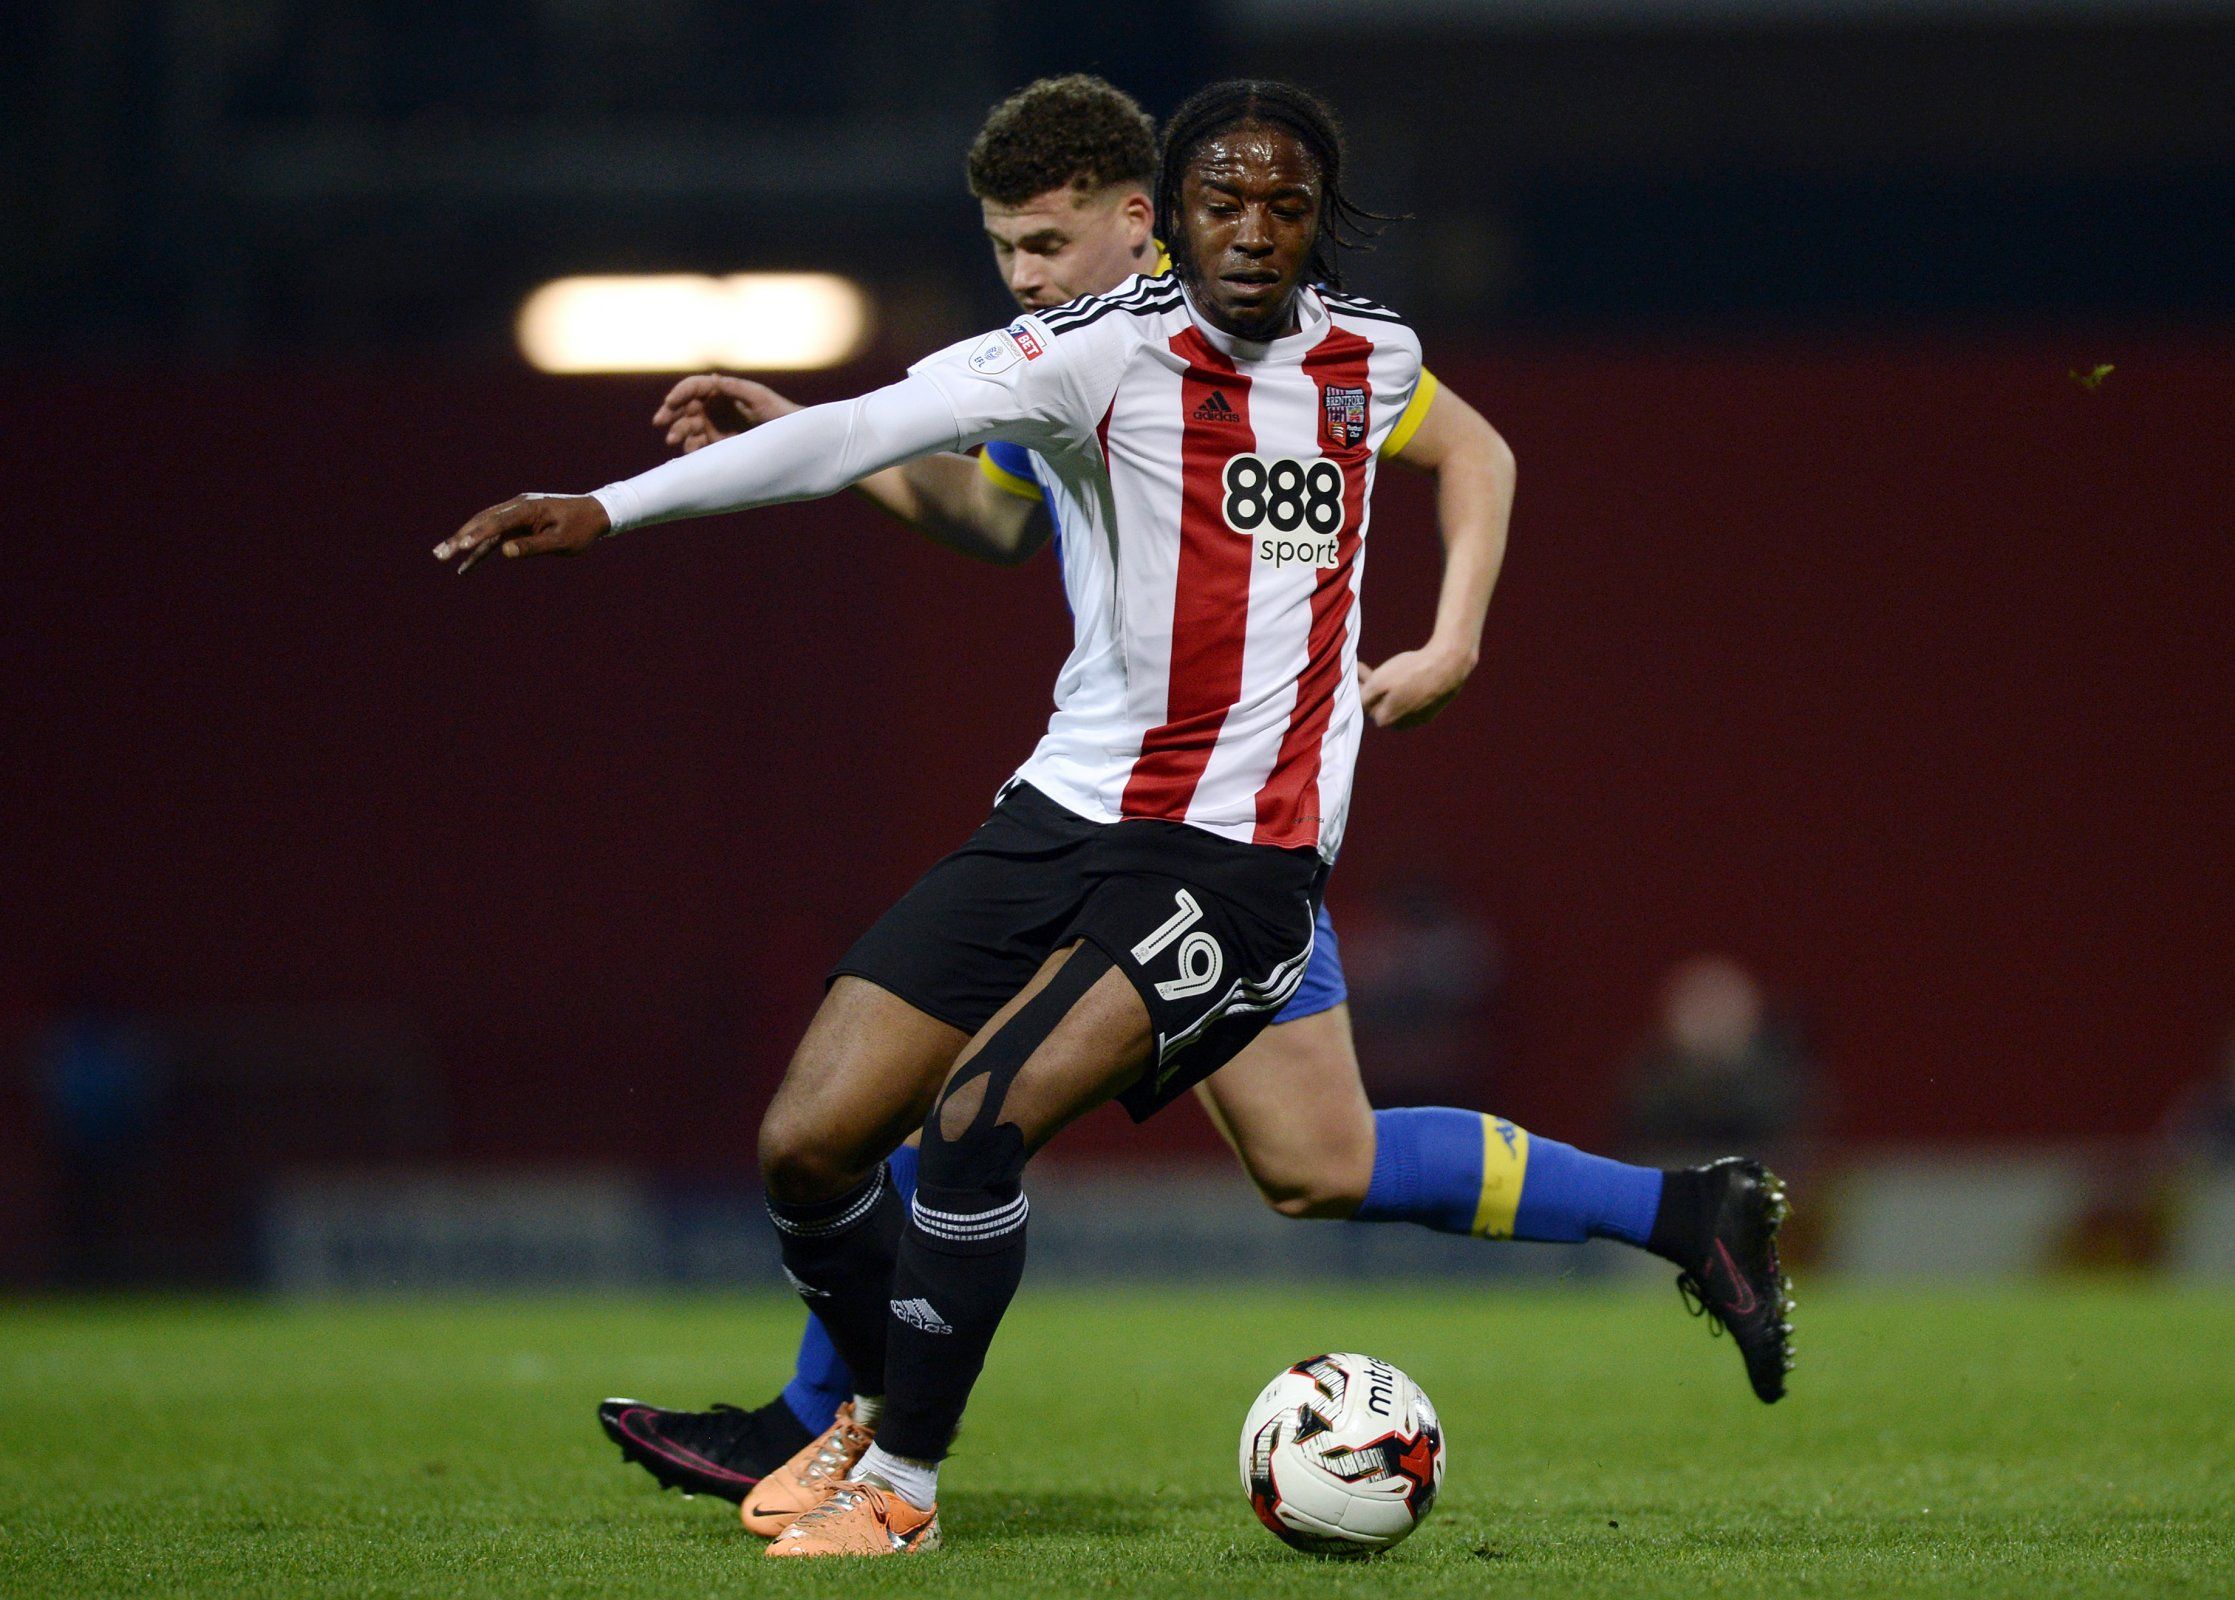 Romaine Sawyers in action for Brentford against Leeds United